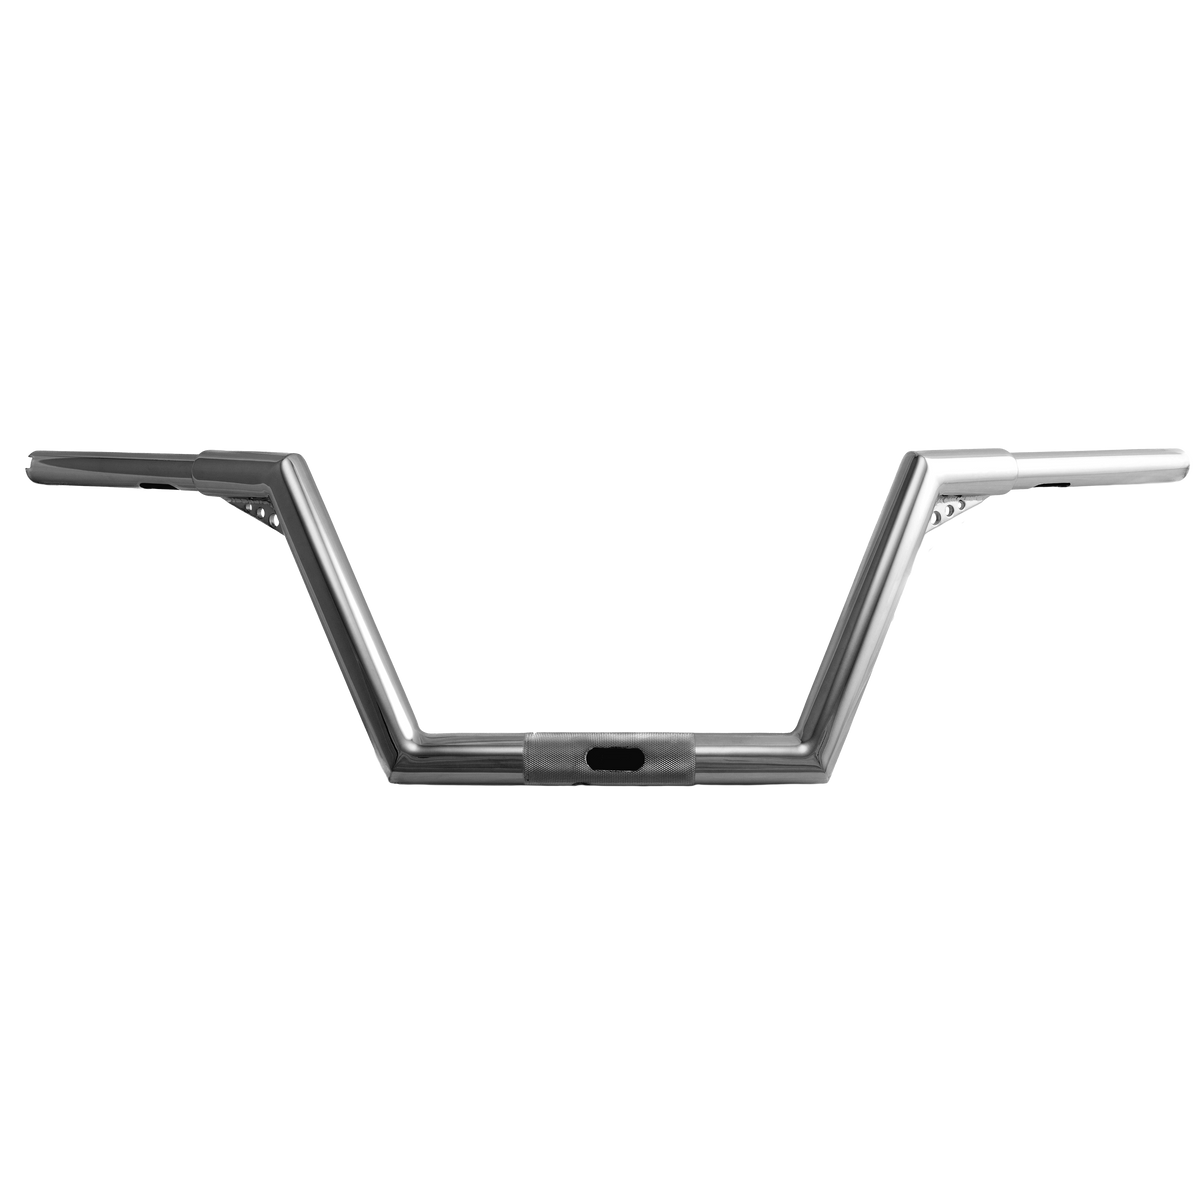 V-Line +2" Handlebars with 1" Clamp - 99-13 Road Glide